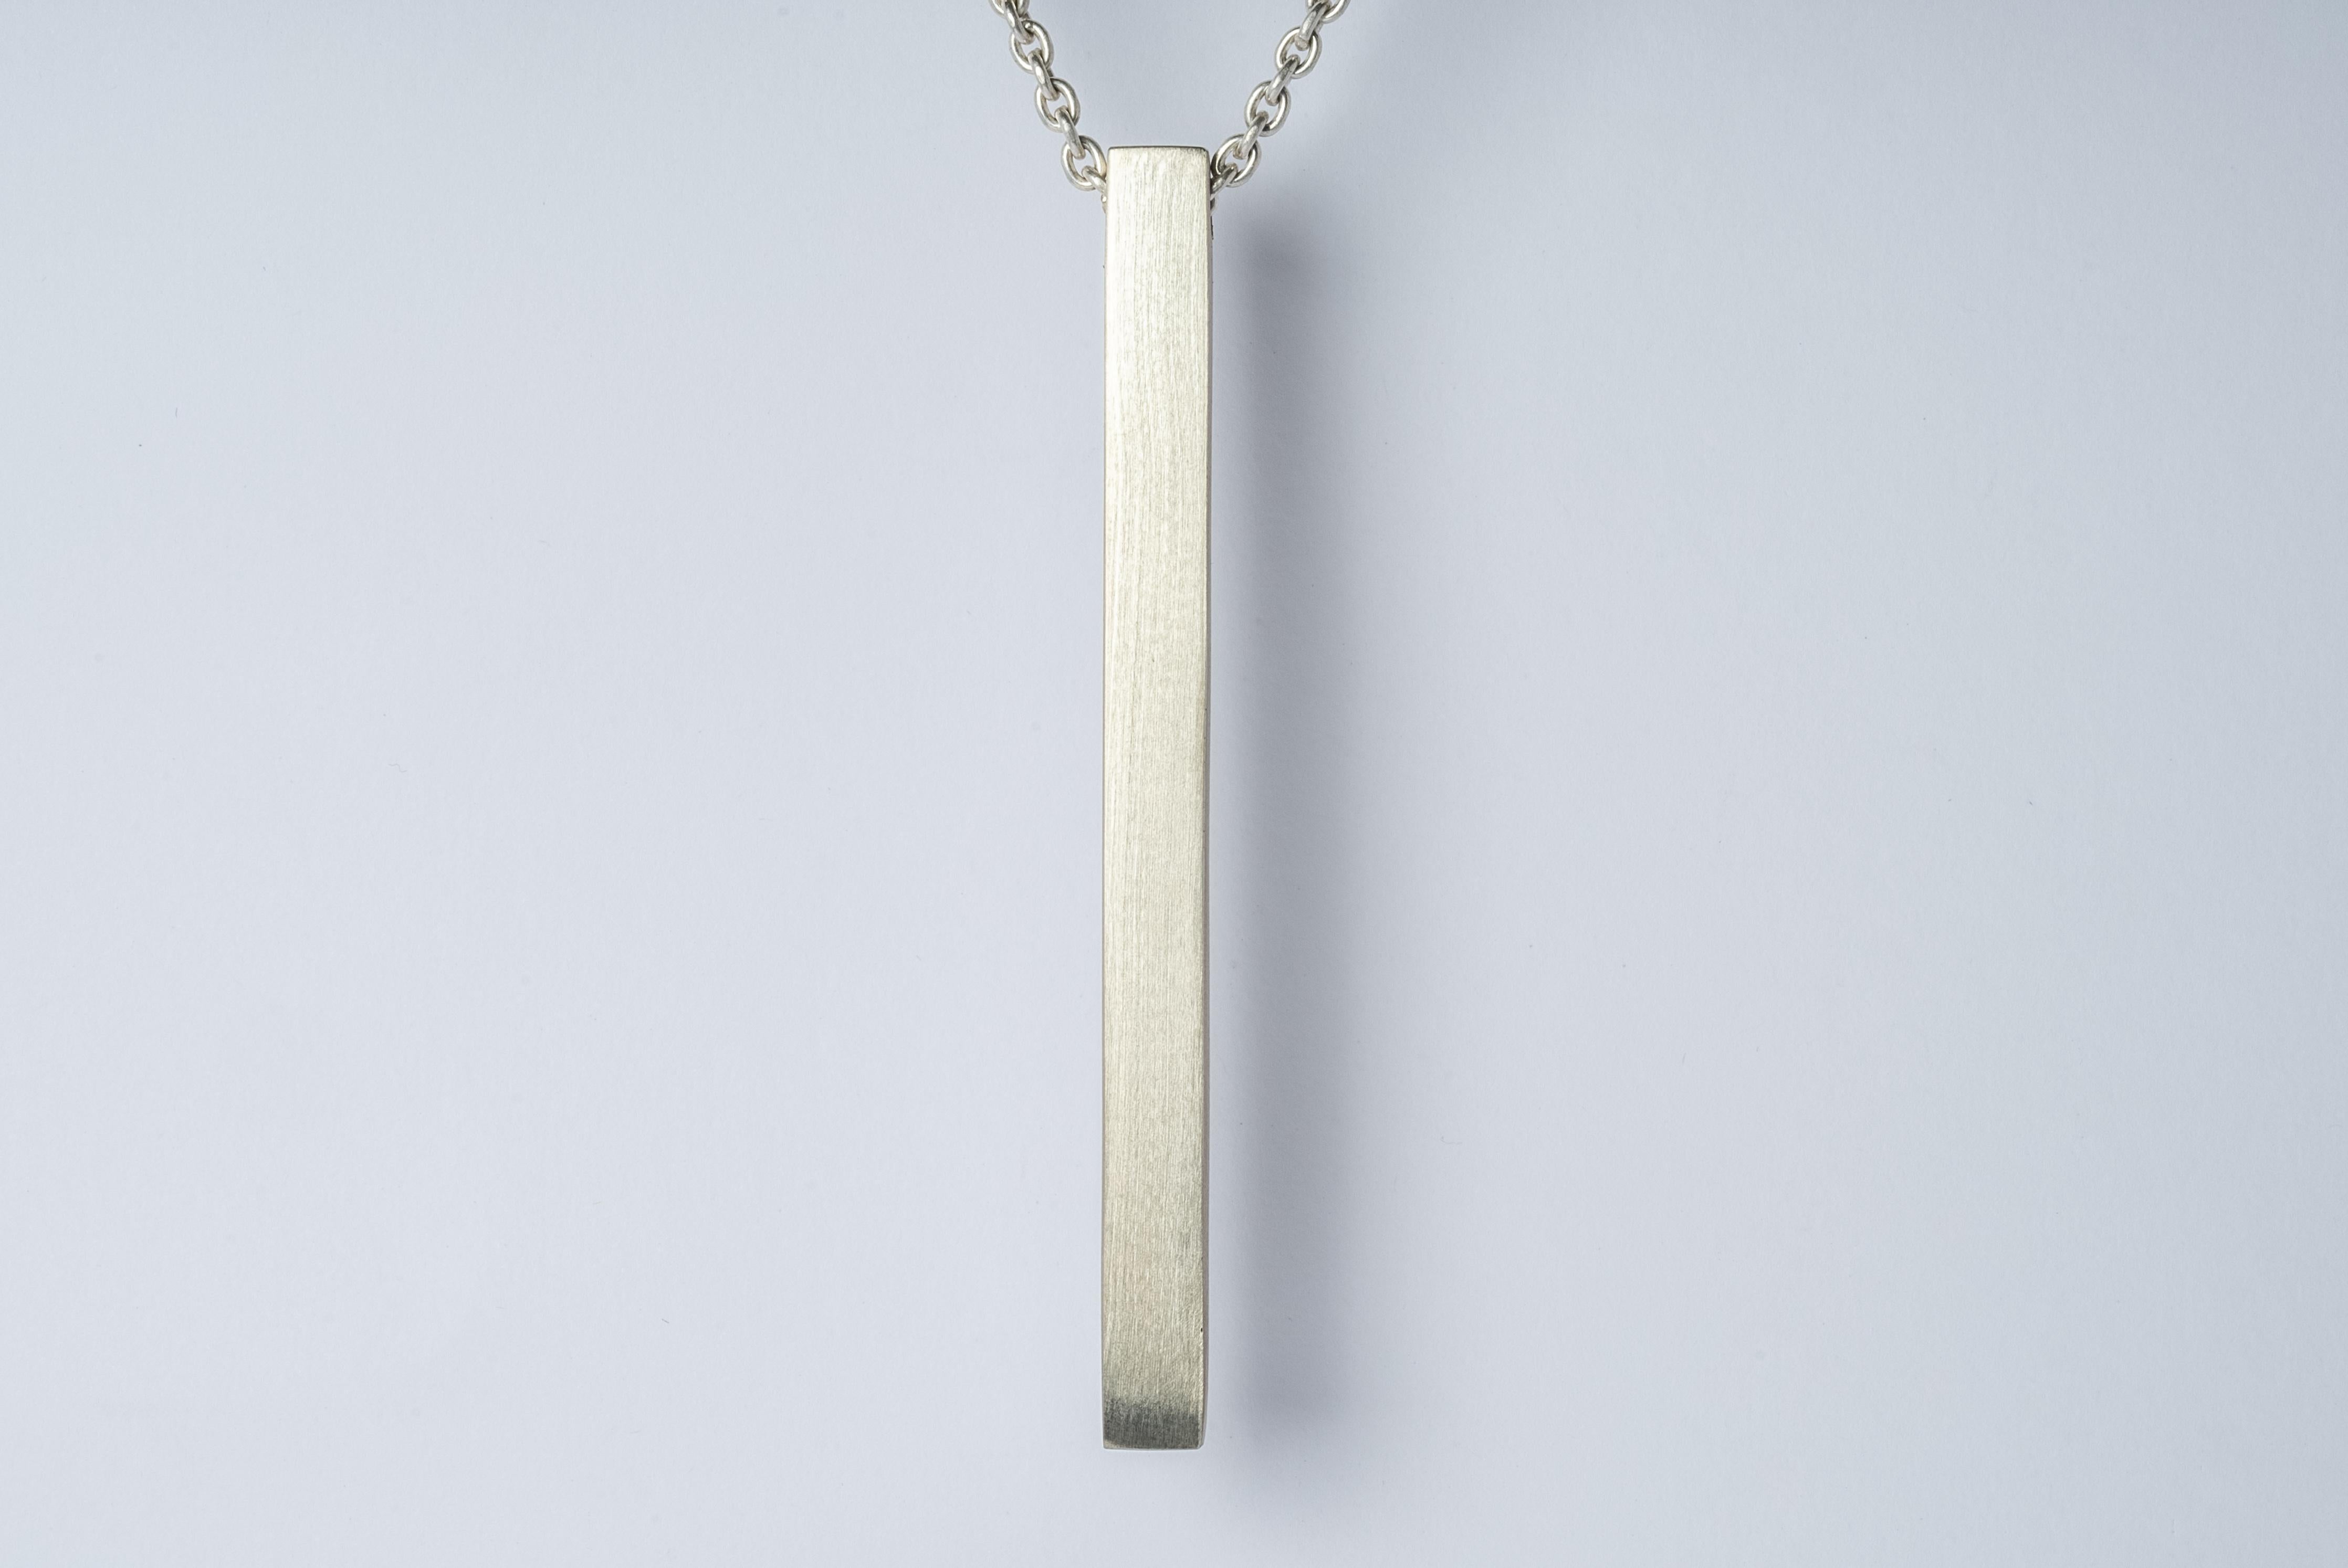 Cuboid Necklace (Half, MZ+MA) In New Condition For Sale In Hong Kong, Hong Kong Island